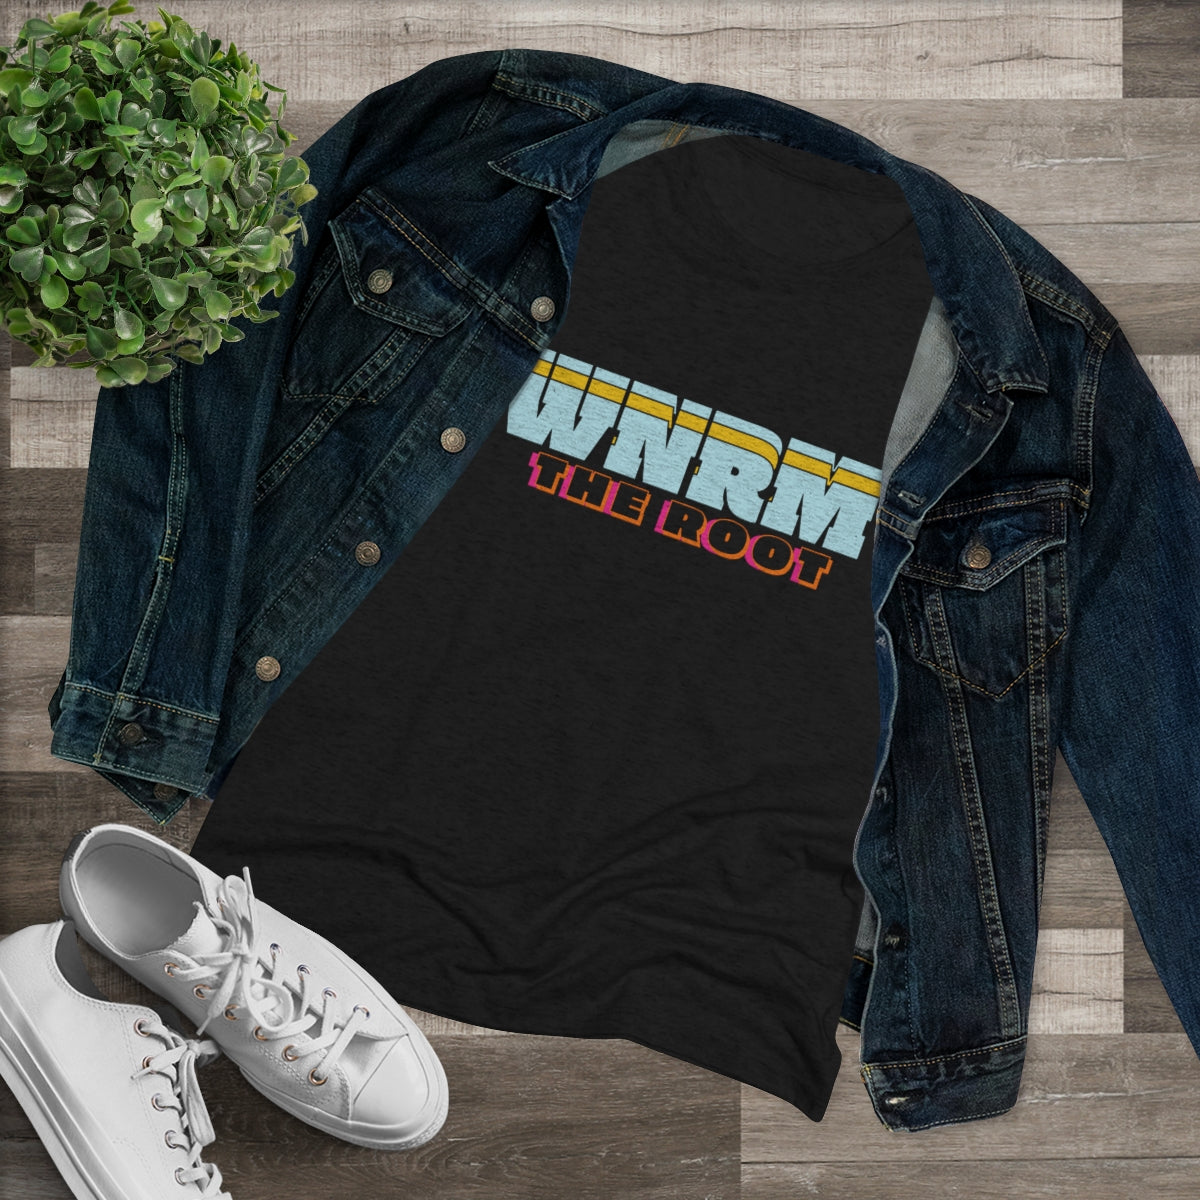 WNRM The Root Logo Tee Women's Triblend Tee, with jean jacket and white sneakers, and a plant